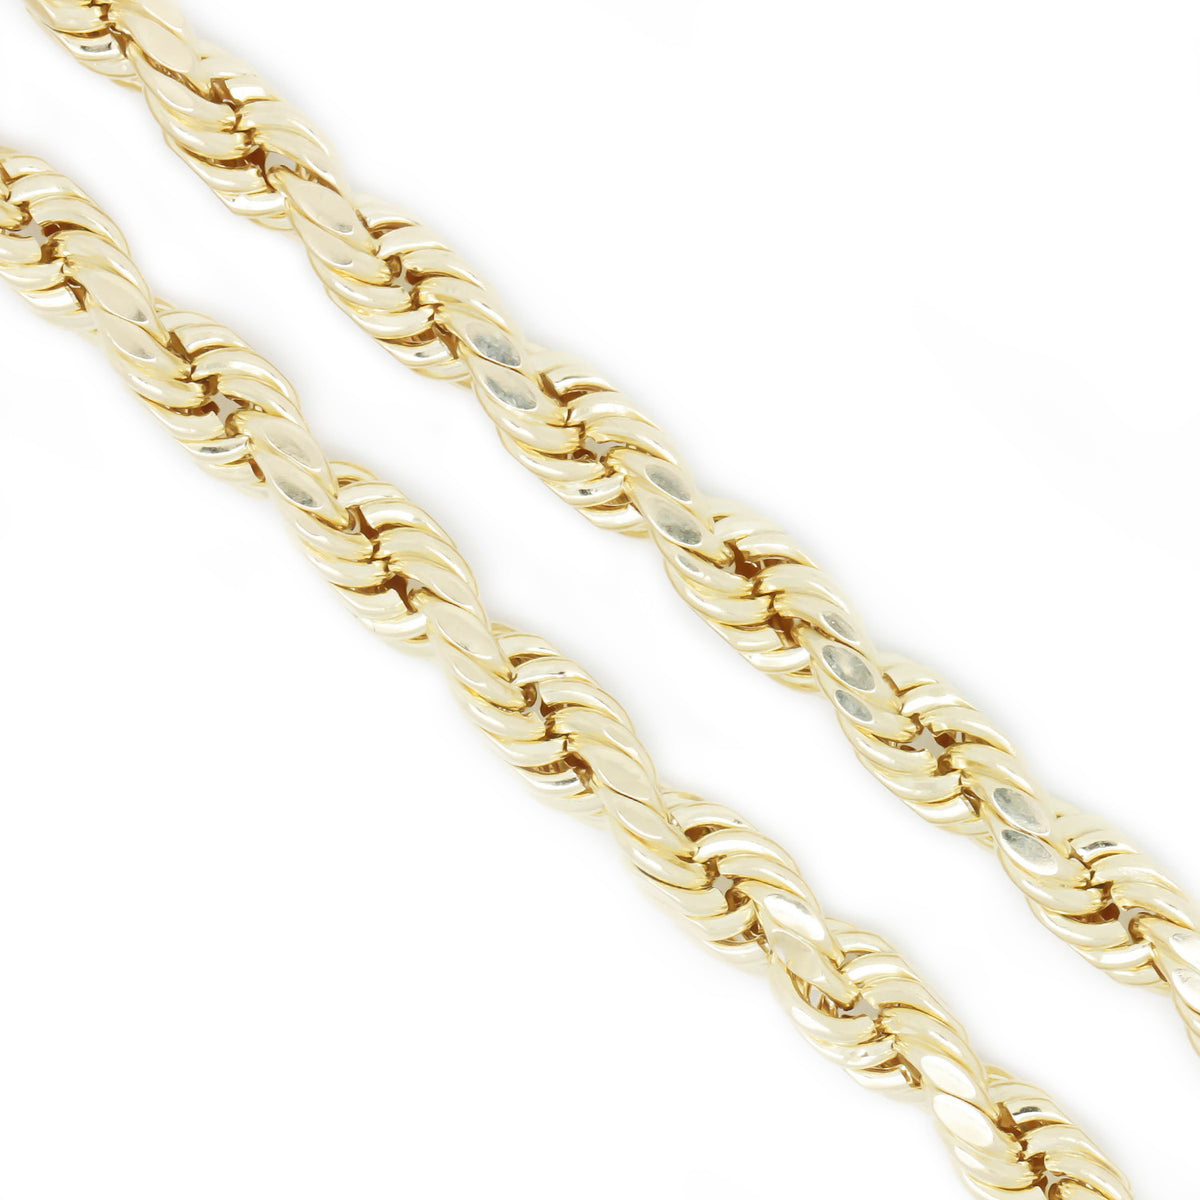 10K Yellow Gold 4.8 mm Rope Chain Necklace 30 Inches